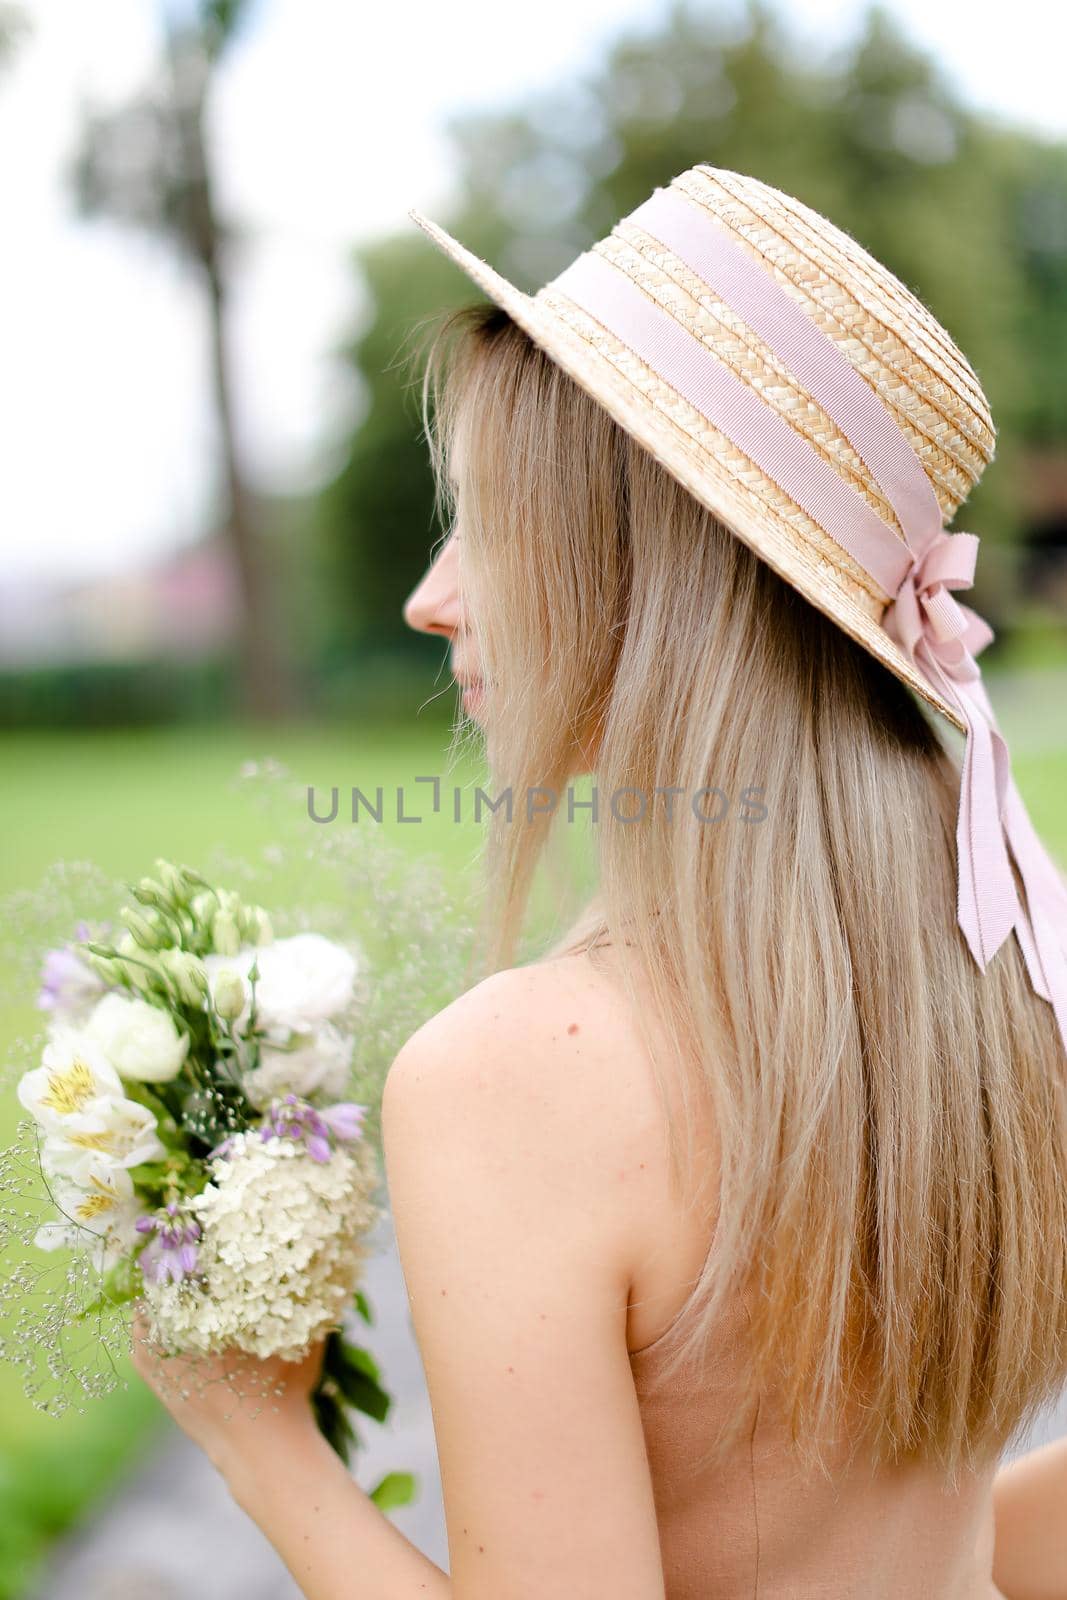 Back view of young blonde woman in body color overalls and hat standing in yeard with flowers. Concept of fashion and summer season.